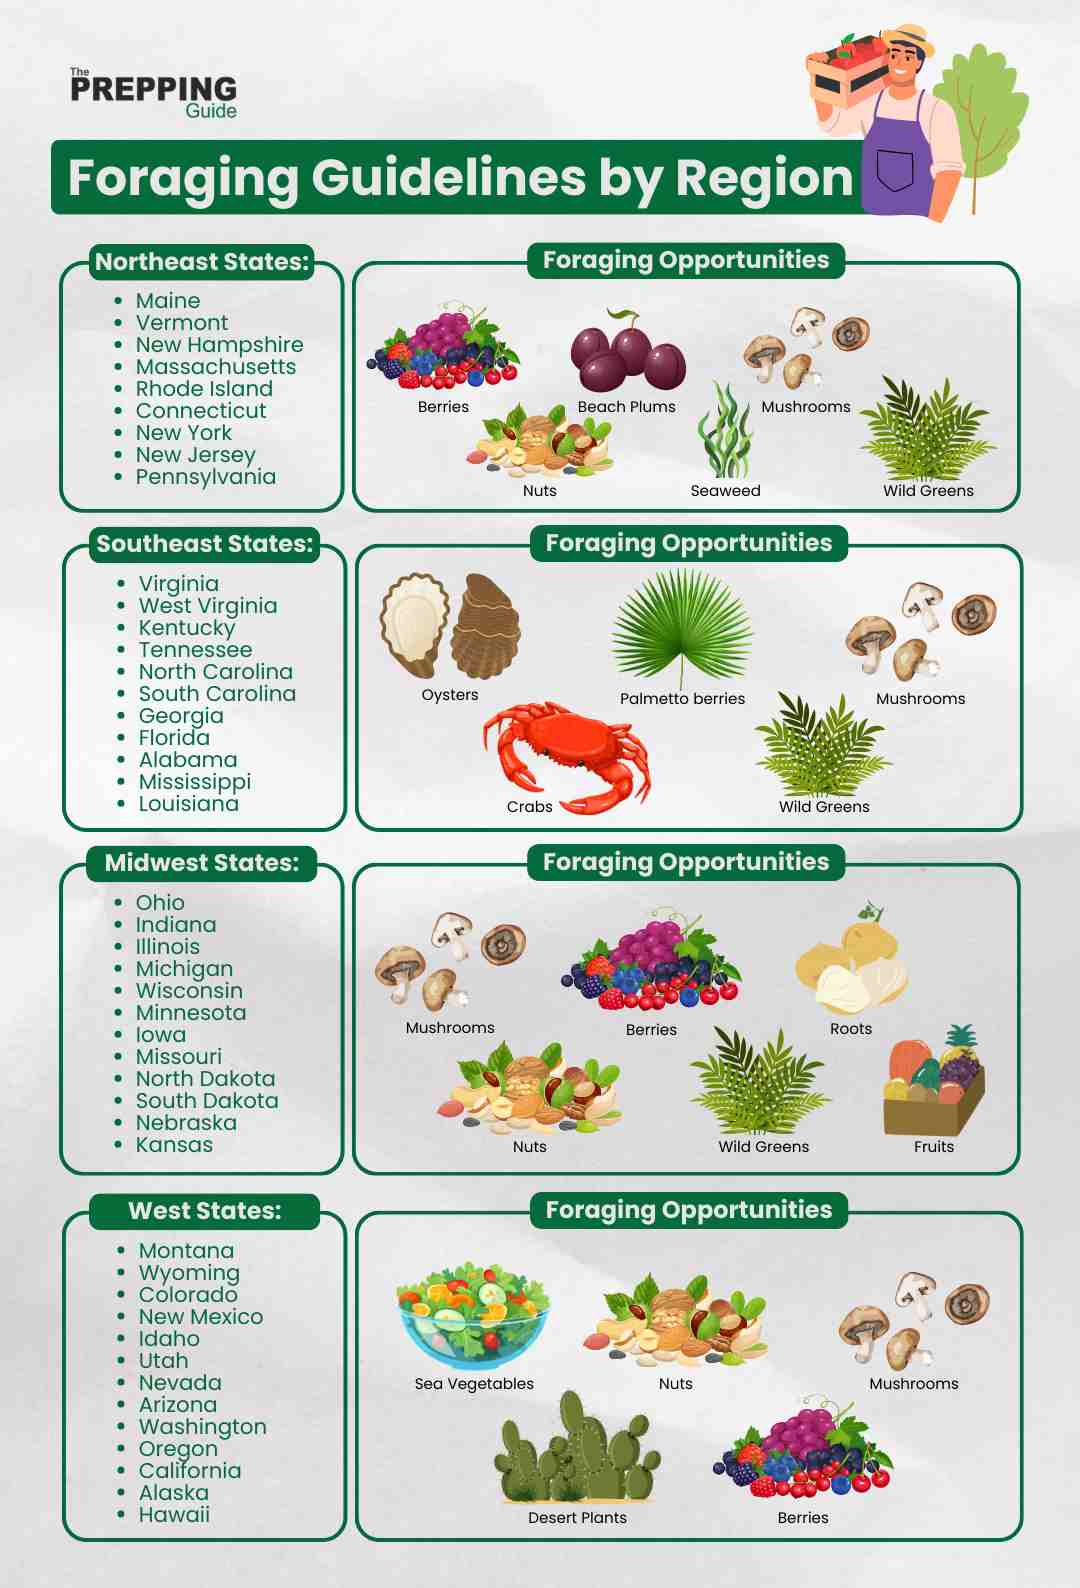 The foraging guidelines by region.